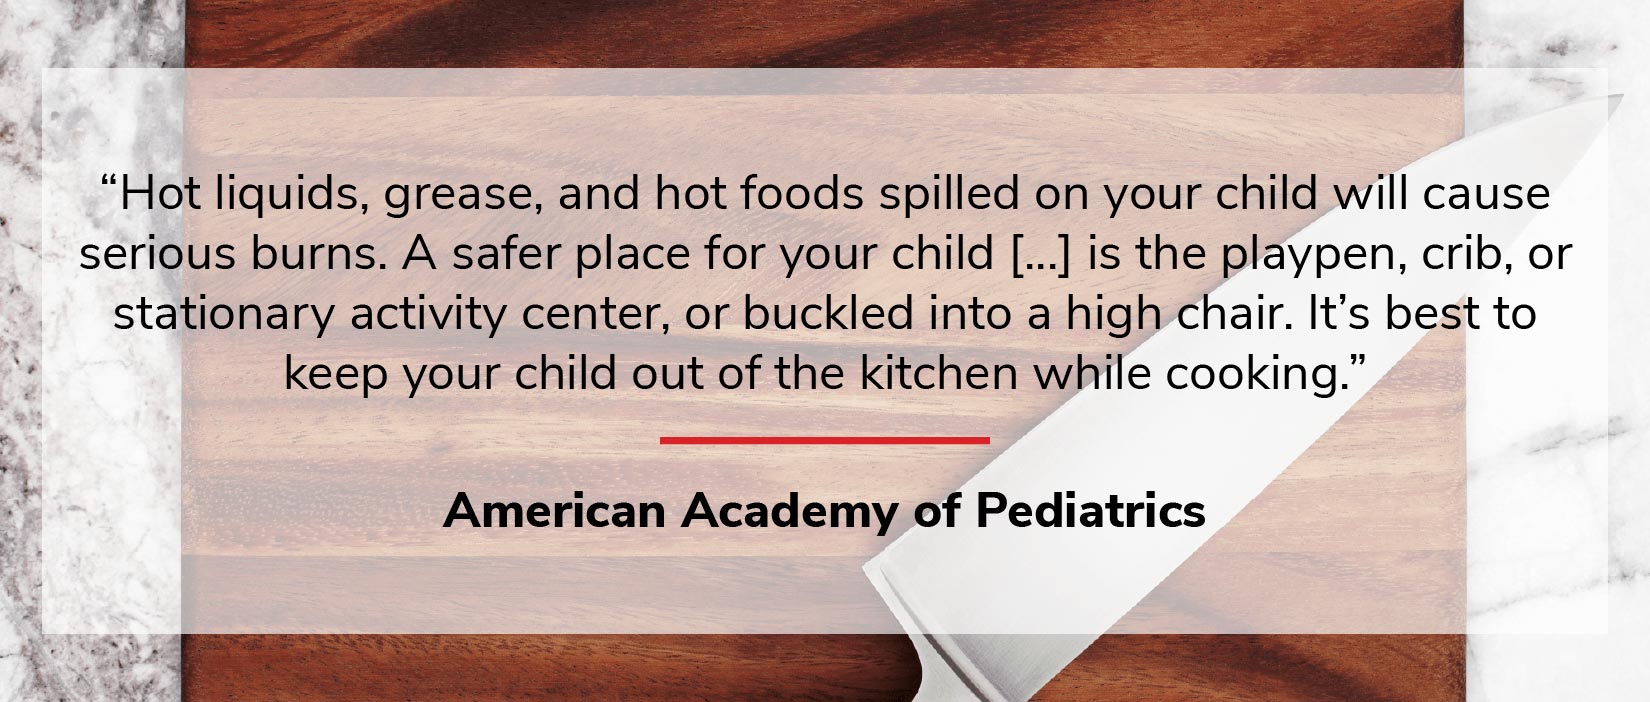 Image of a knife on a wood board with a quote overlay on kitchen safety by the American Academy of Pediatrics.